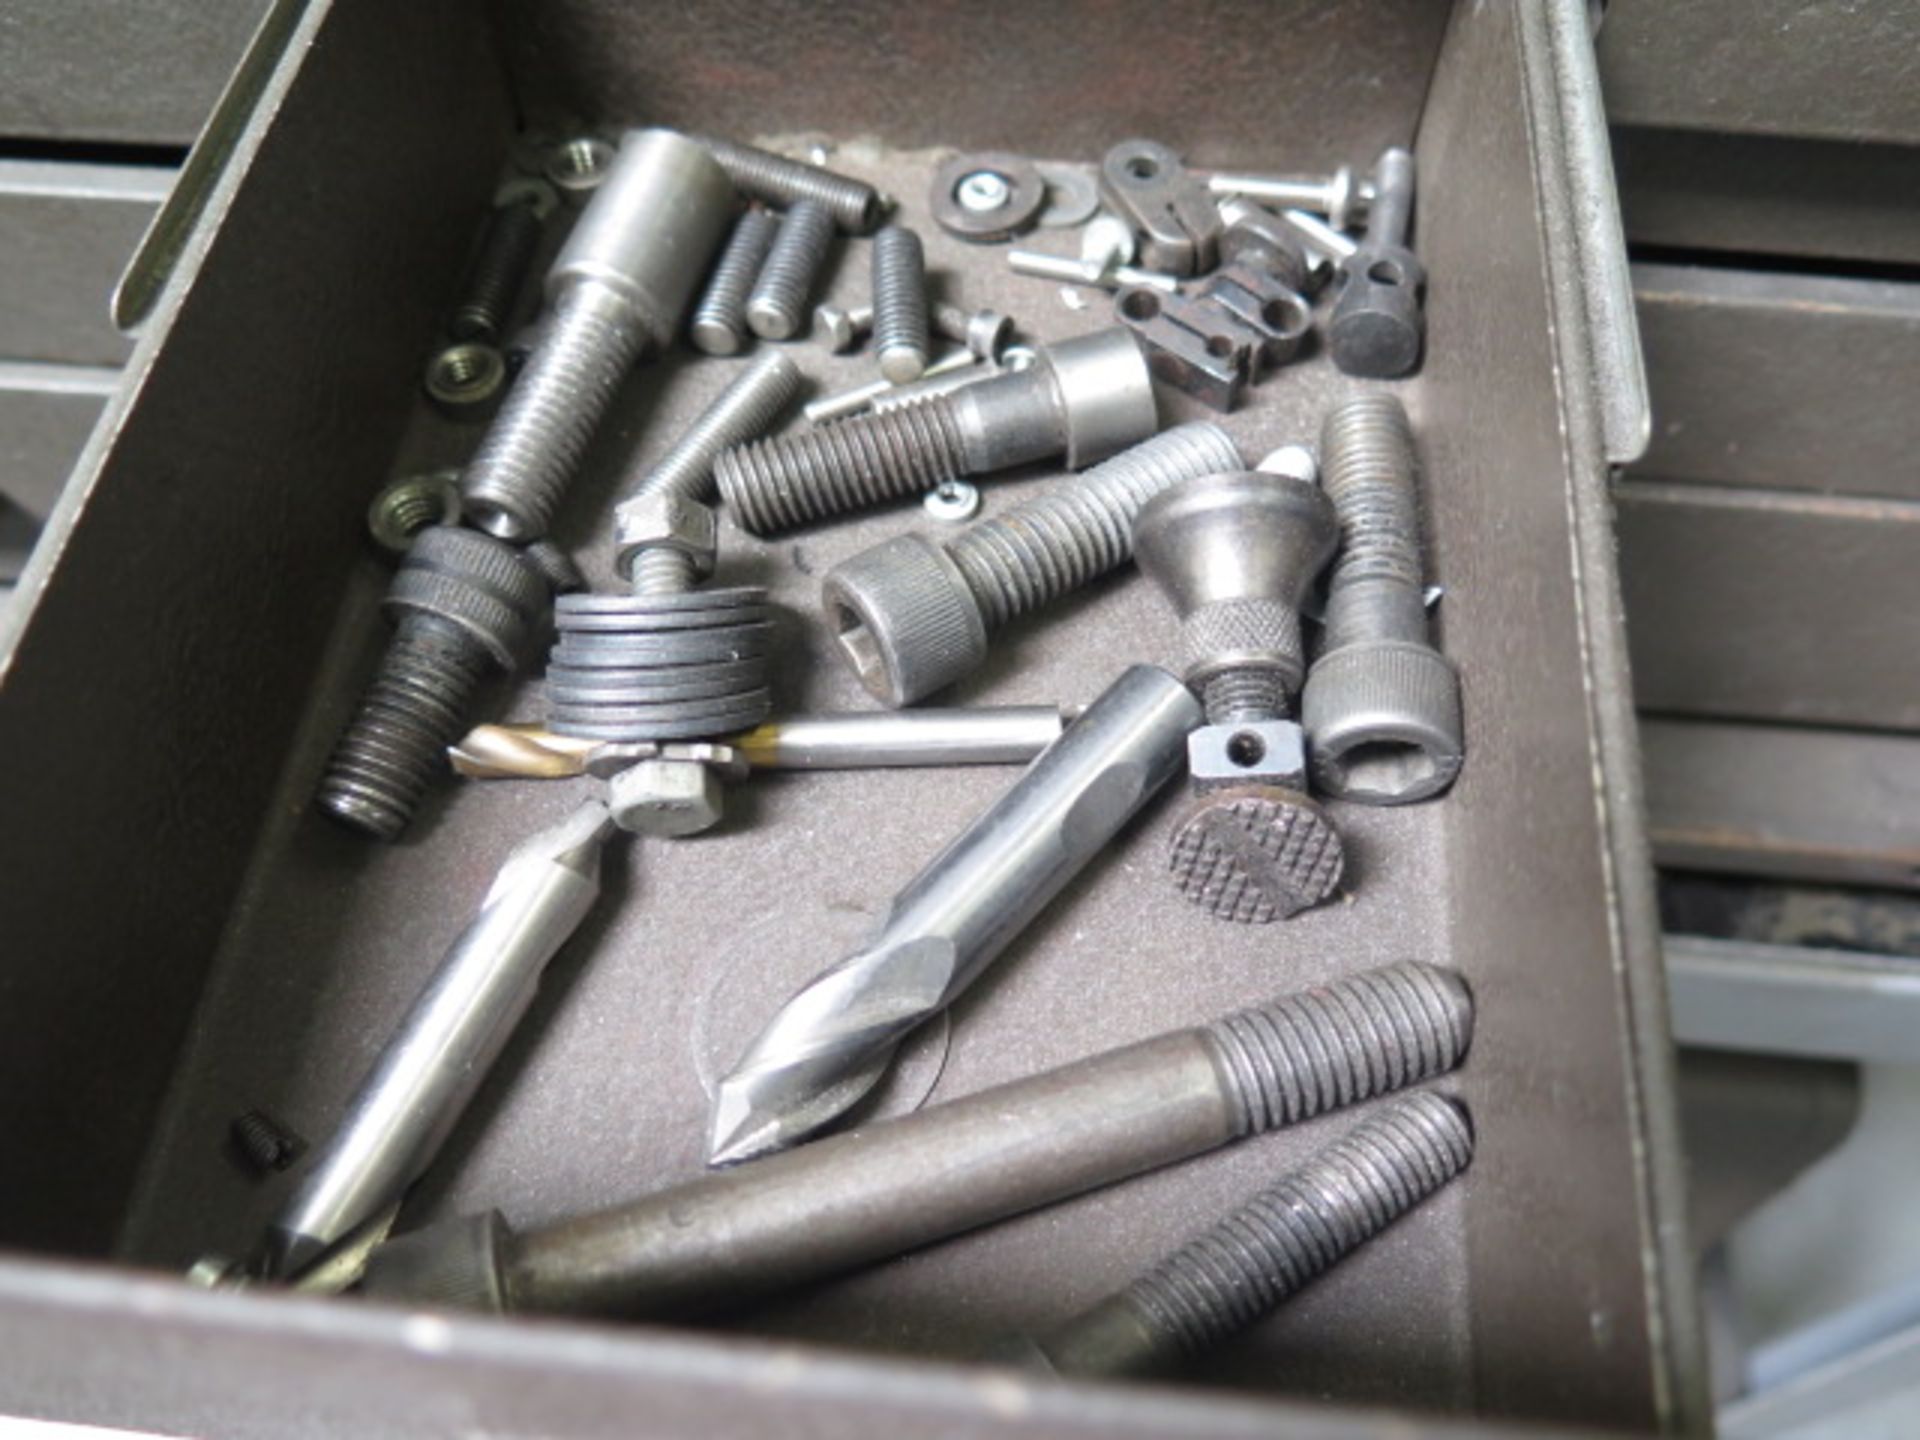 Kennedy Tool Boxes w/ Drills and Misc Tooling w/ Taper Tooling Cart (SOLD AS-IS - NO WARRANTY) - Image 6 of 19